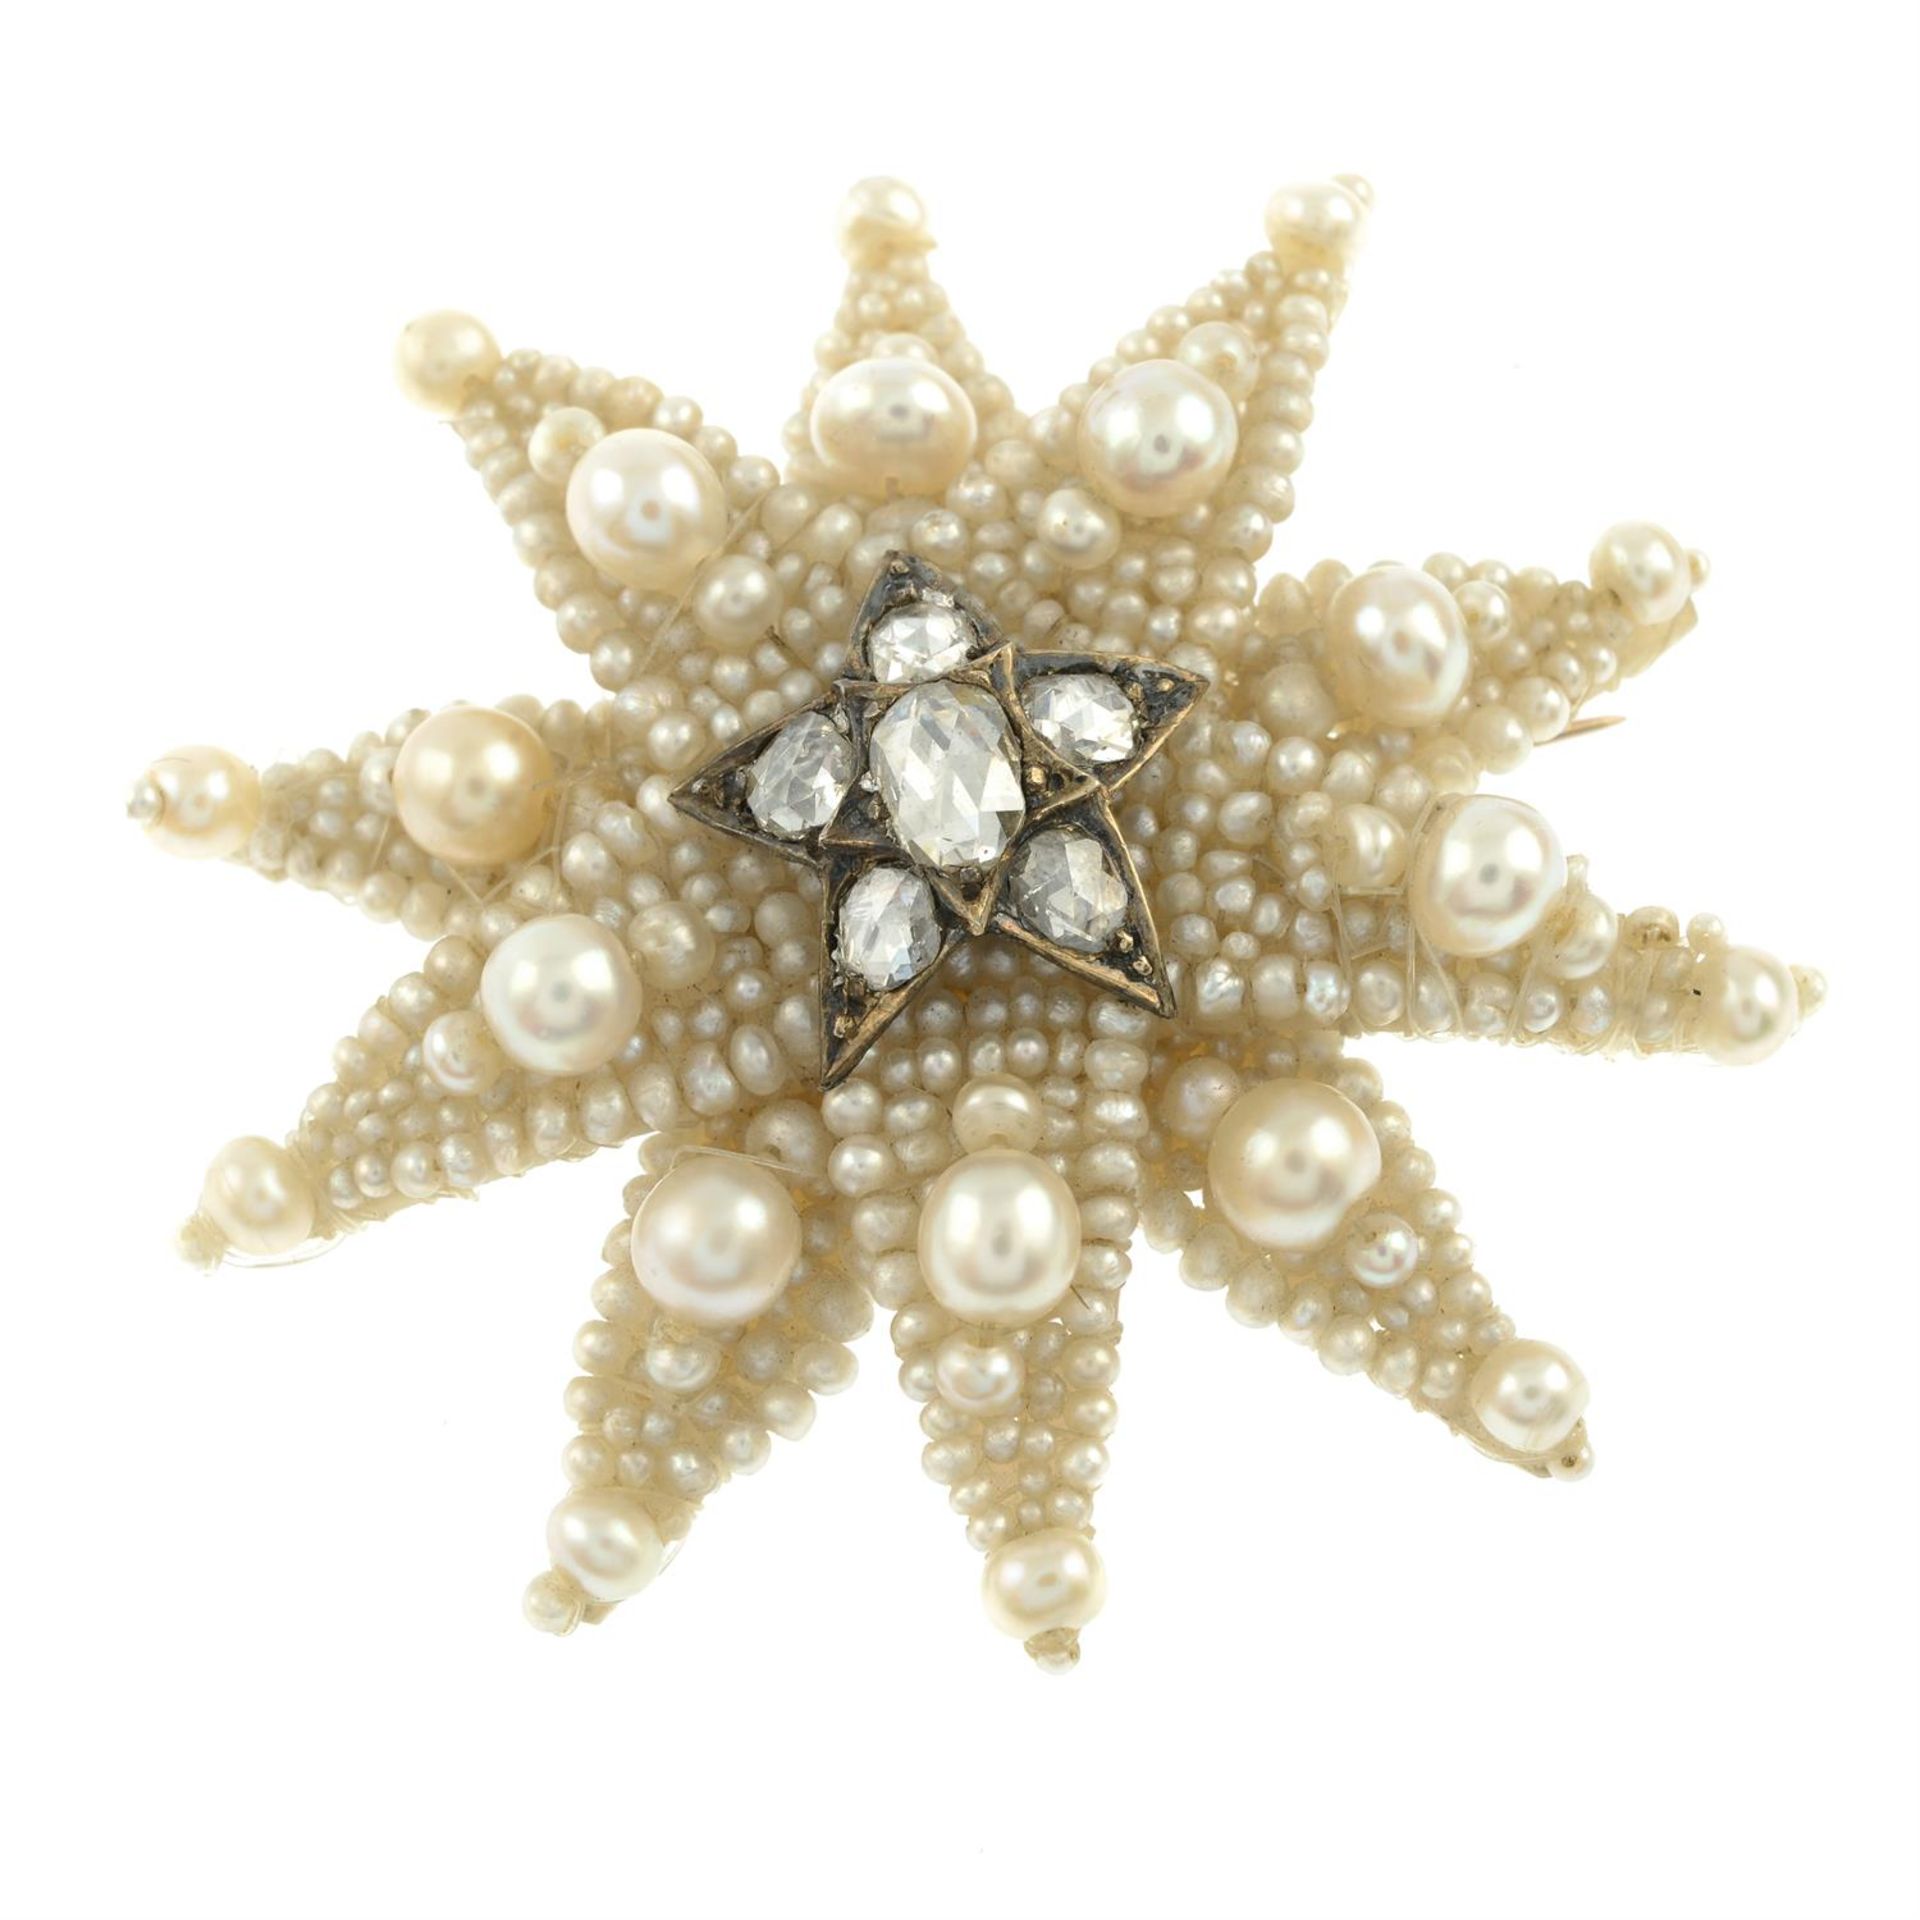 A 19th century rose-cut diamond, pearl and seed pearl star brooch. - Image 2 of 4